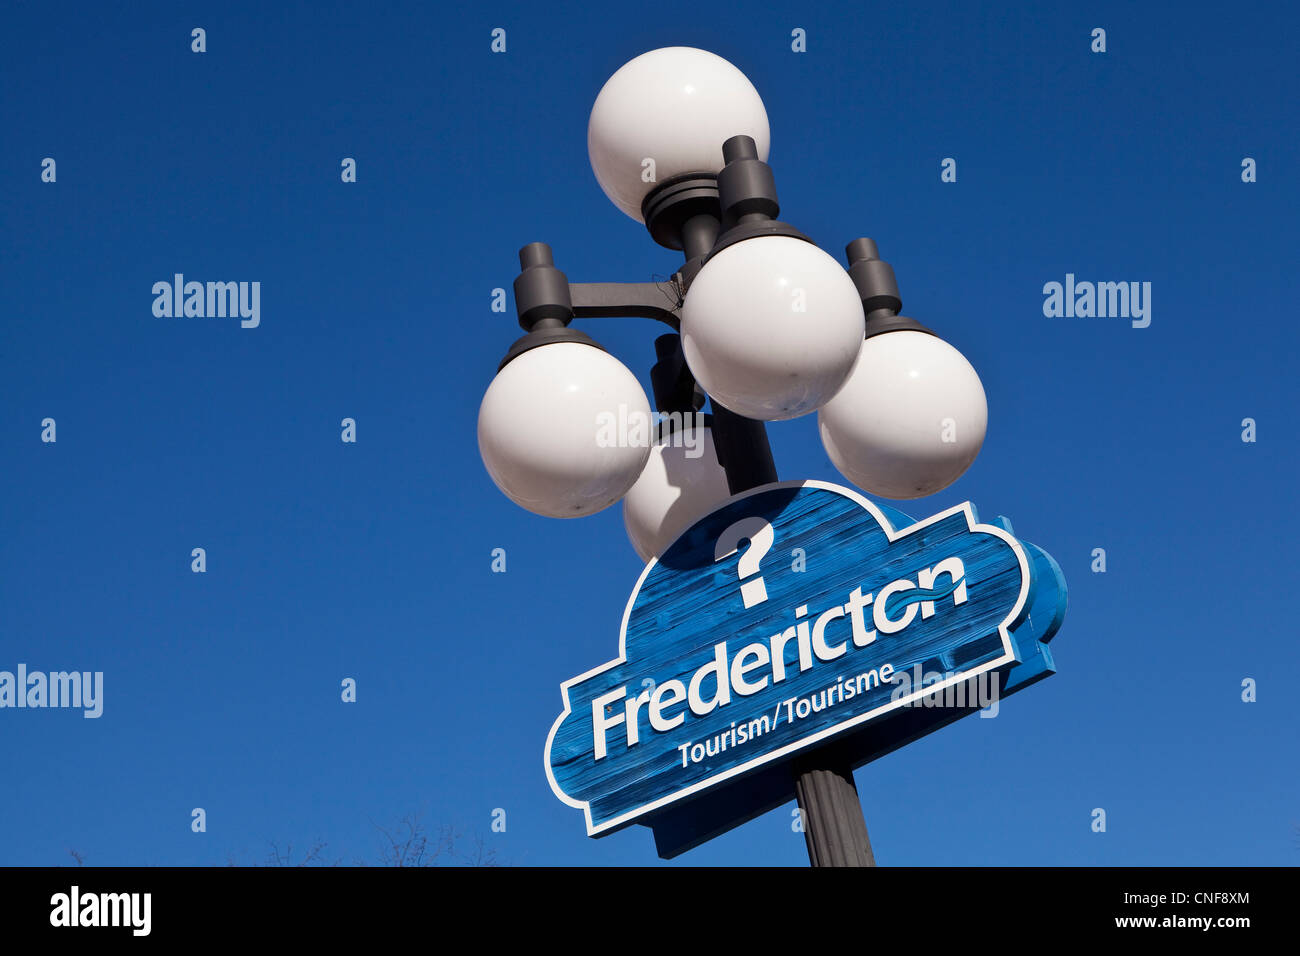 A sign for tourism information is pictured in Fredericton, New Brunswick Stock Photo